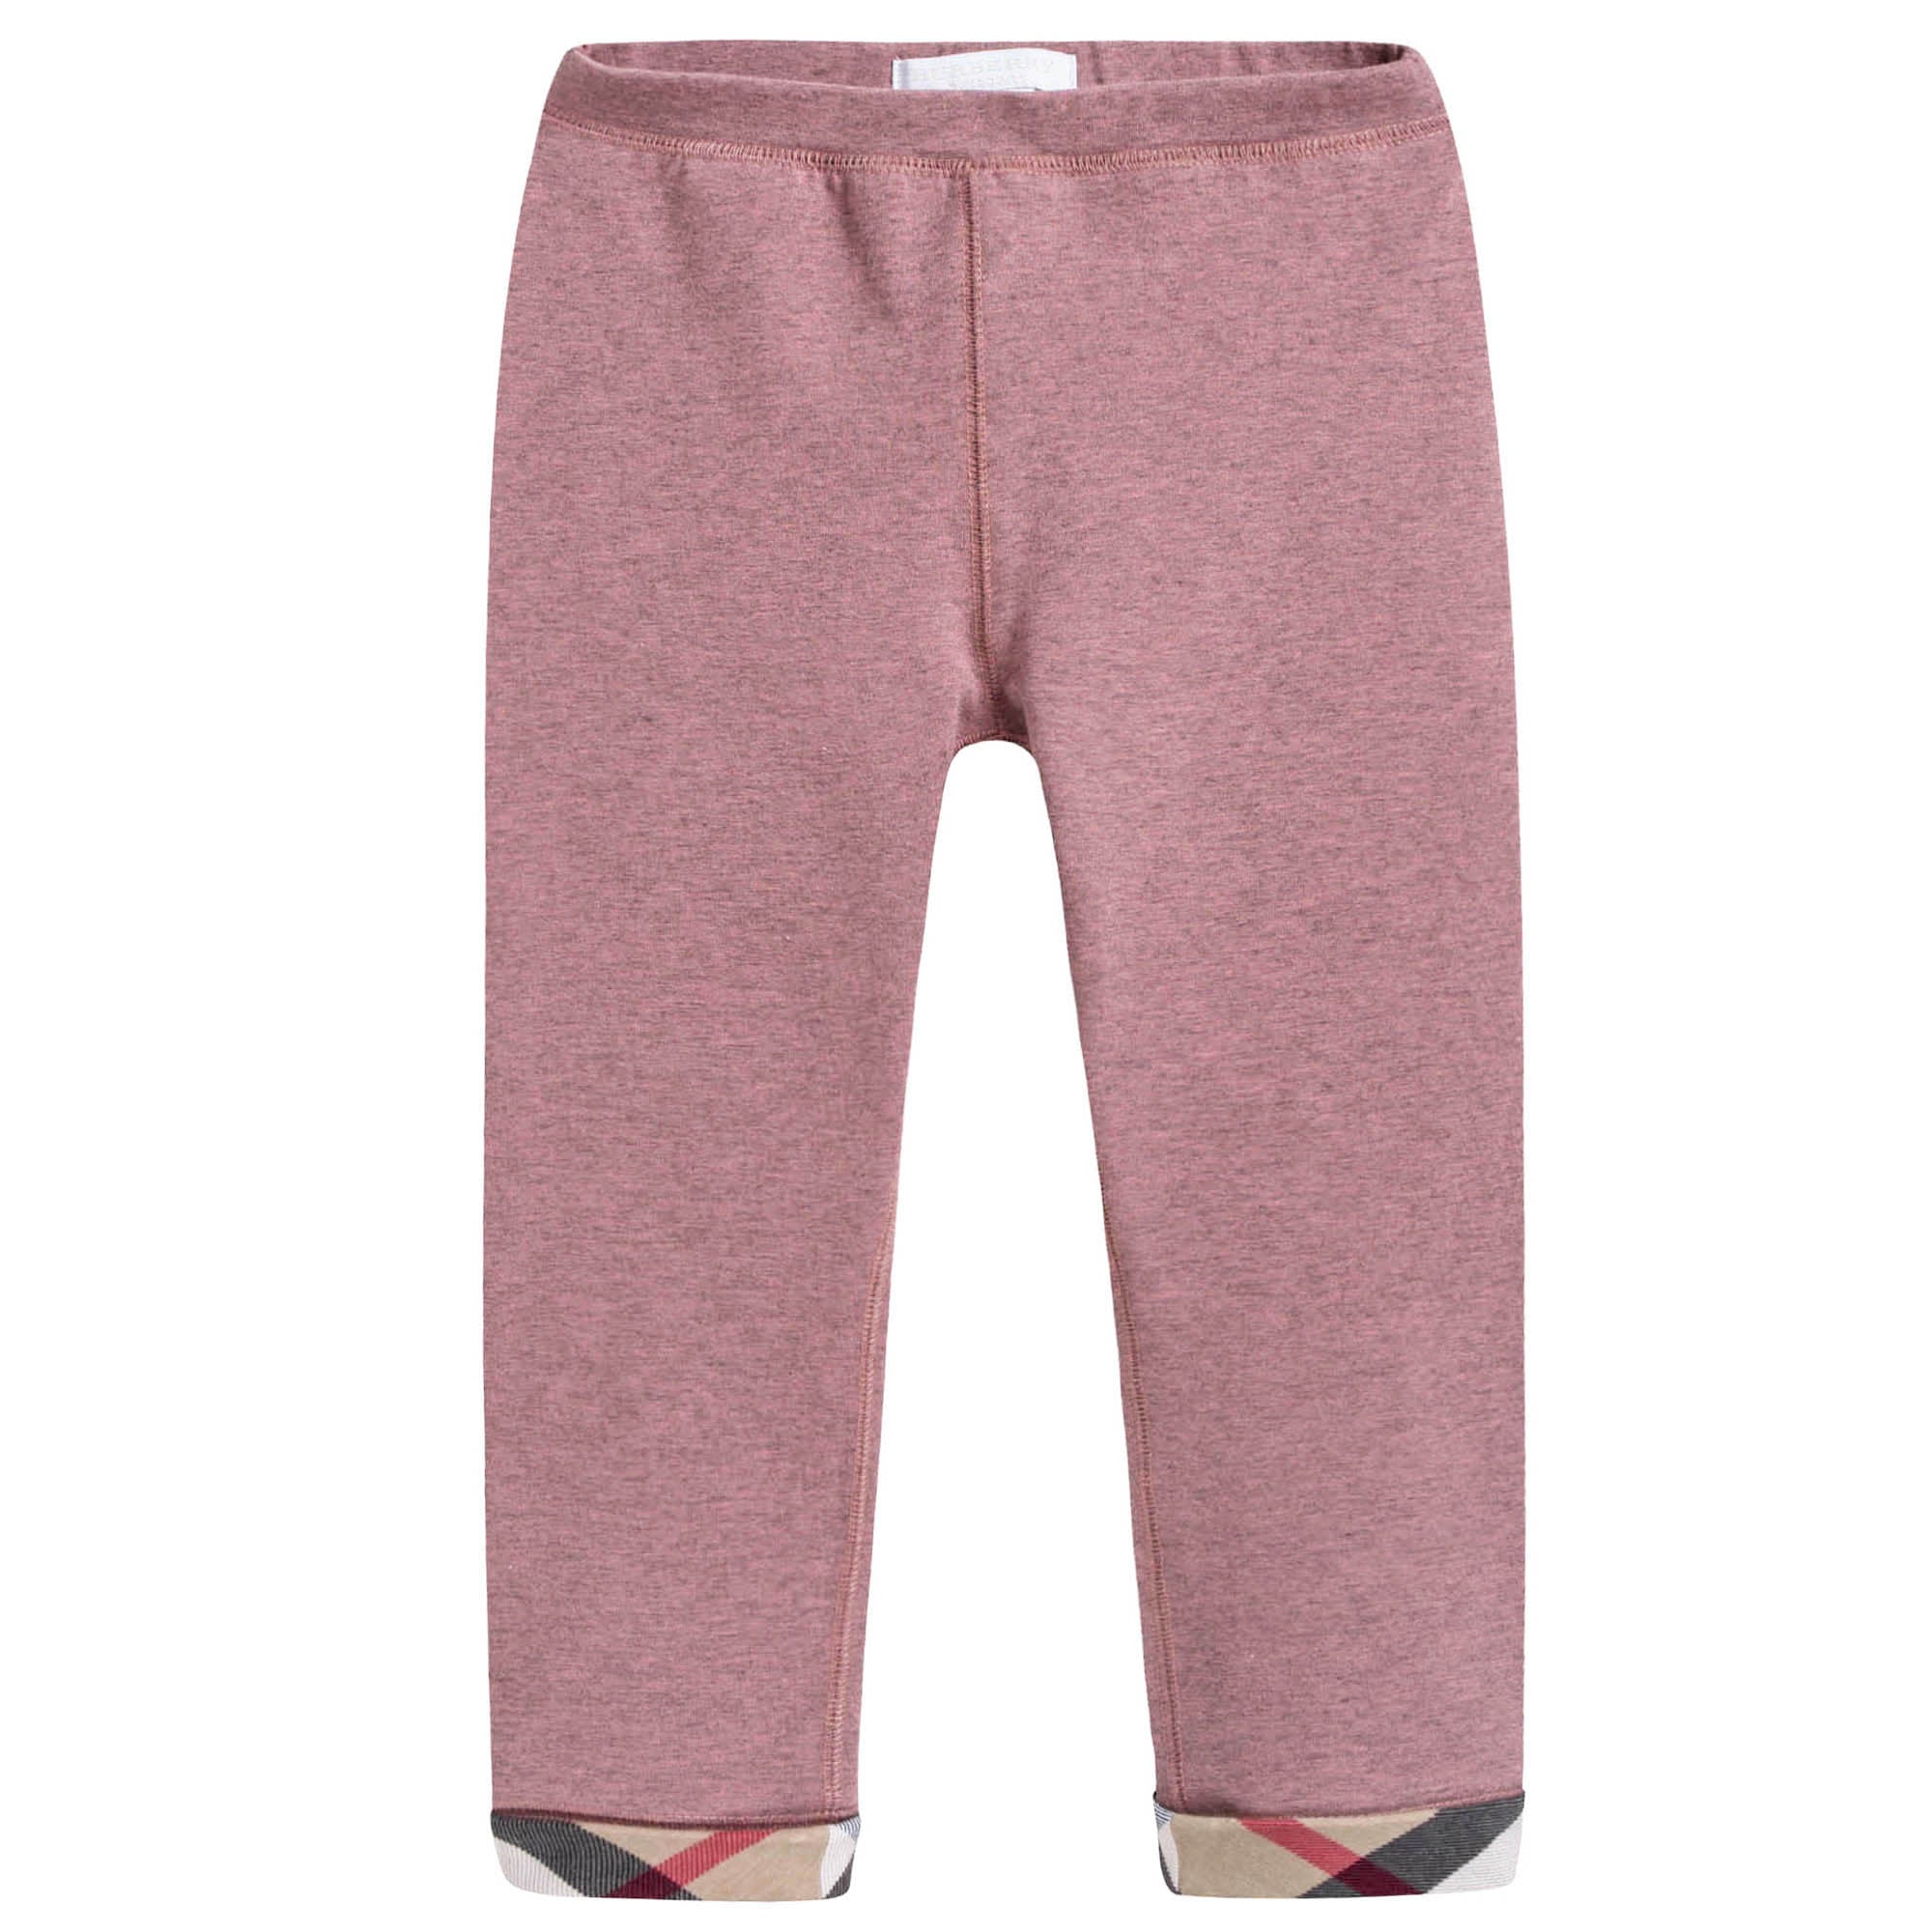 Girls Pink Cotton Leggings With Check Cuffs